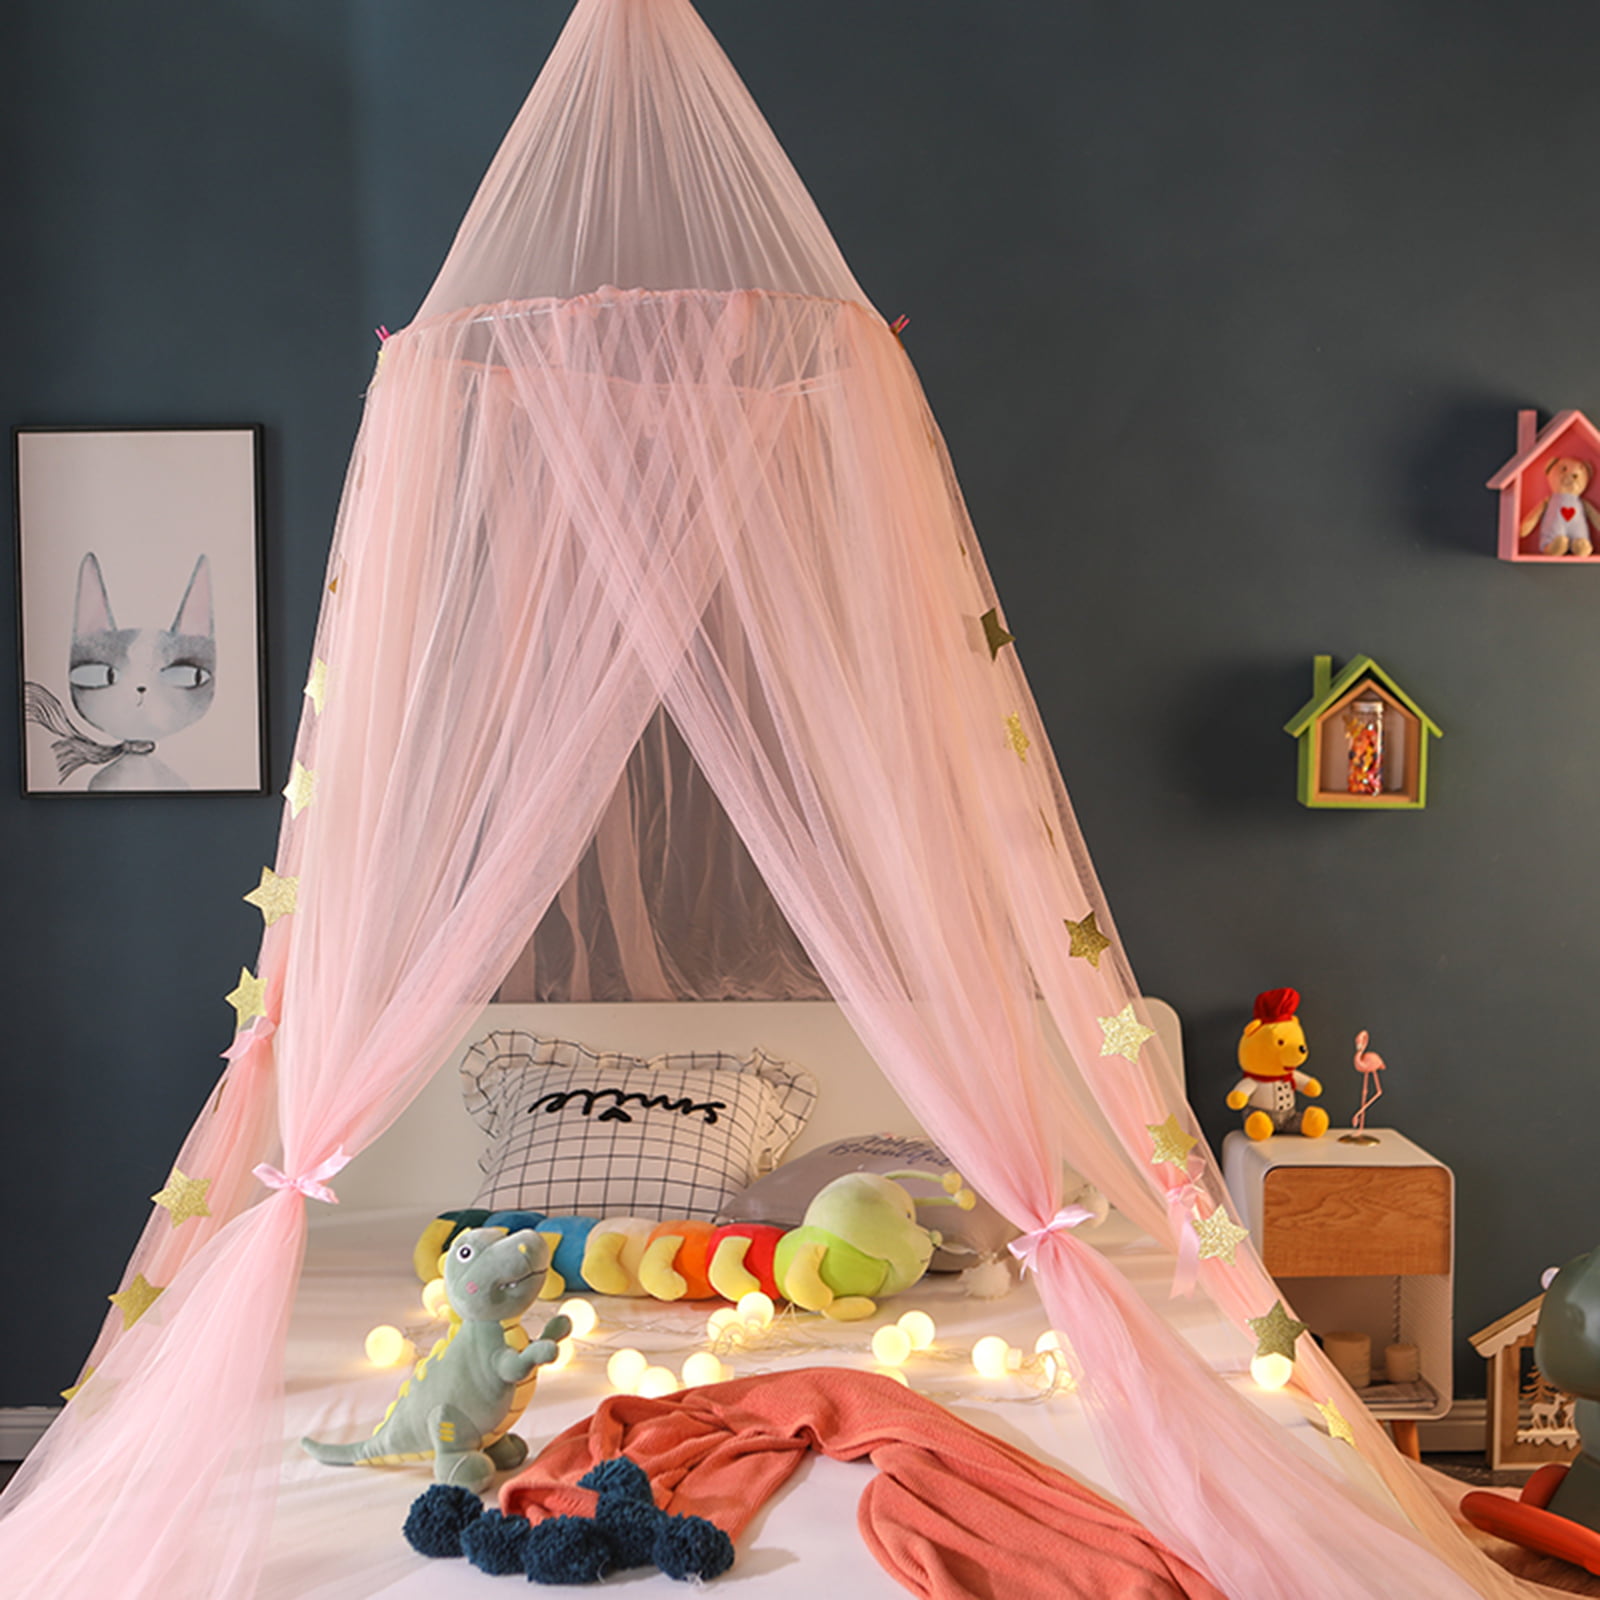 Kids Baby Bed Canopy Bed Lace Mosquito Net Curtain Bedding Dome Tent Room Decor 